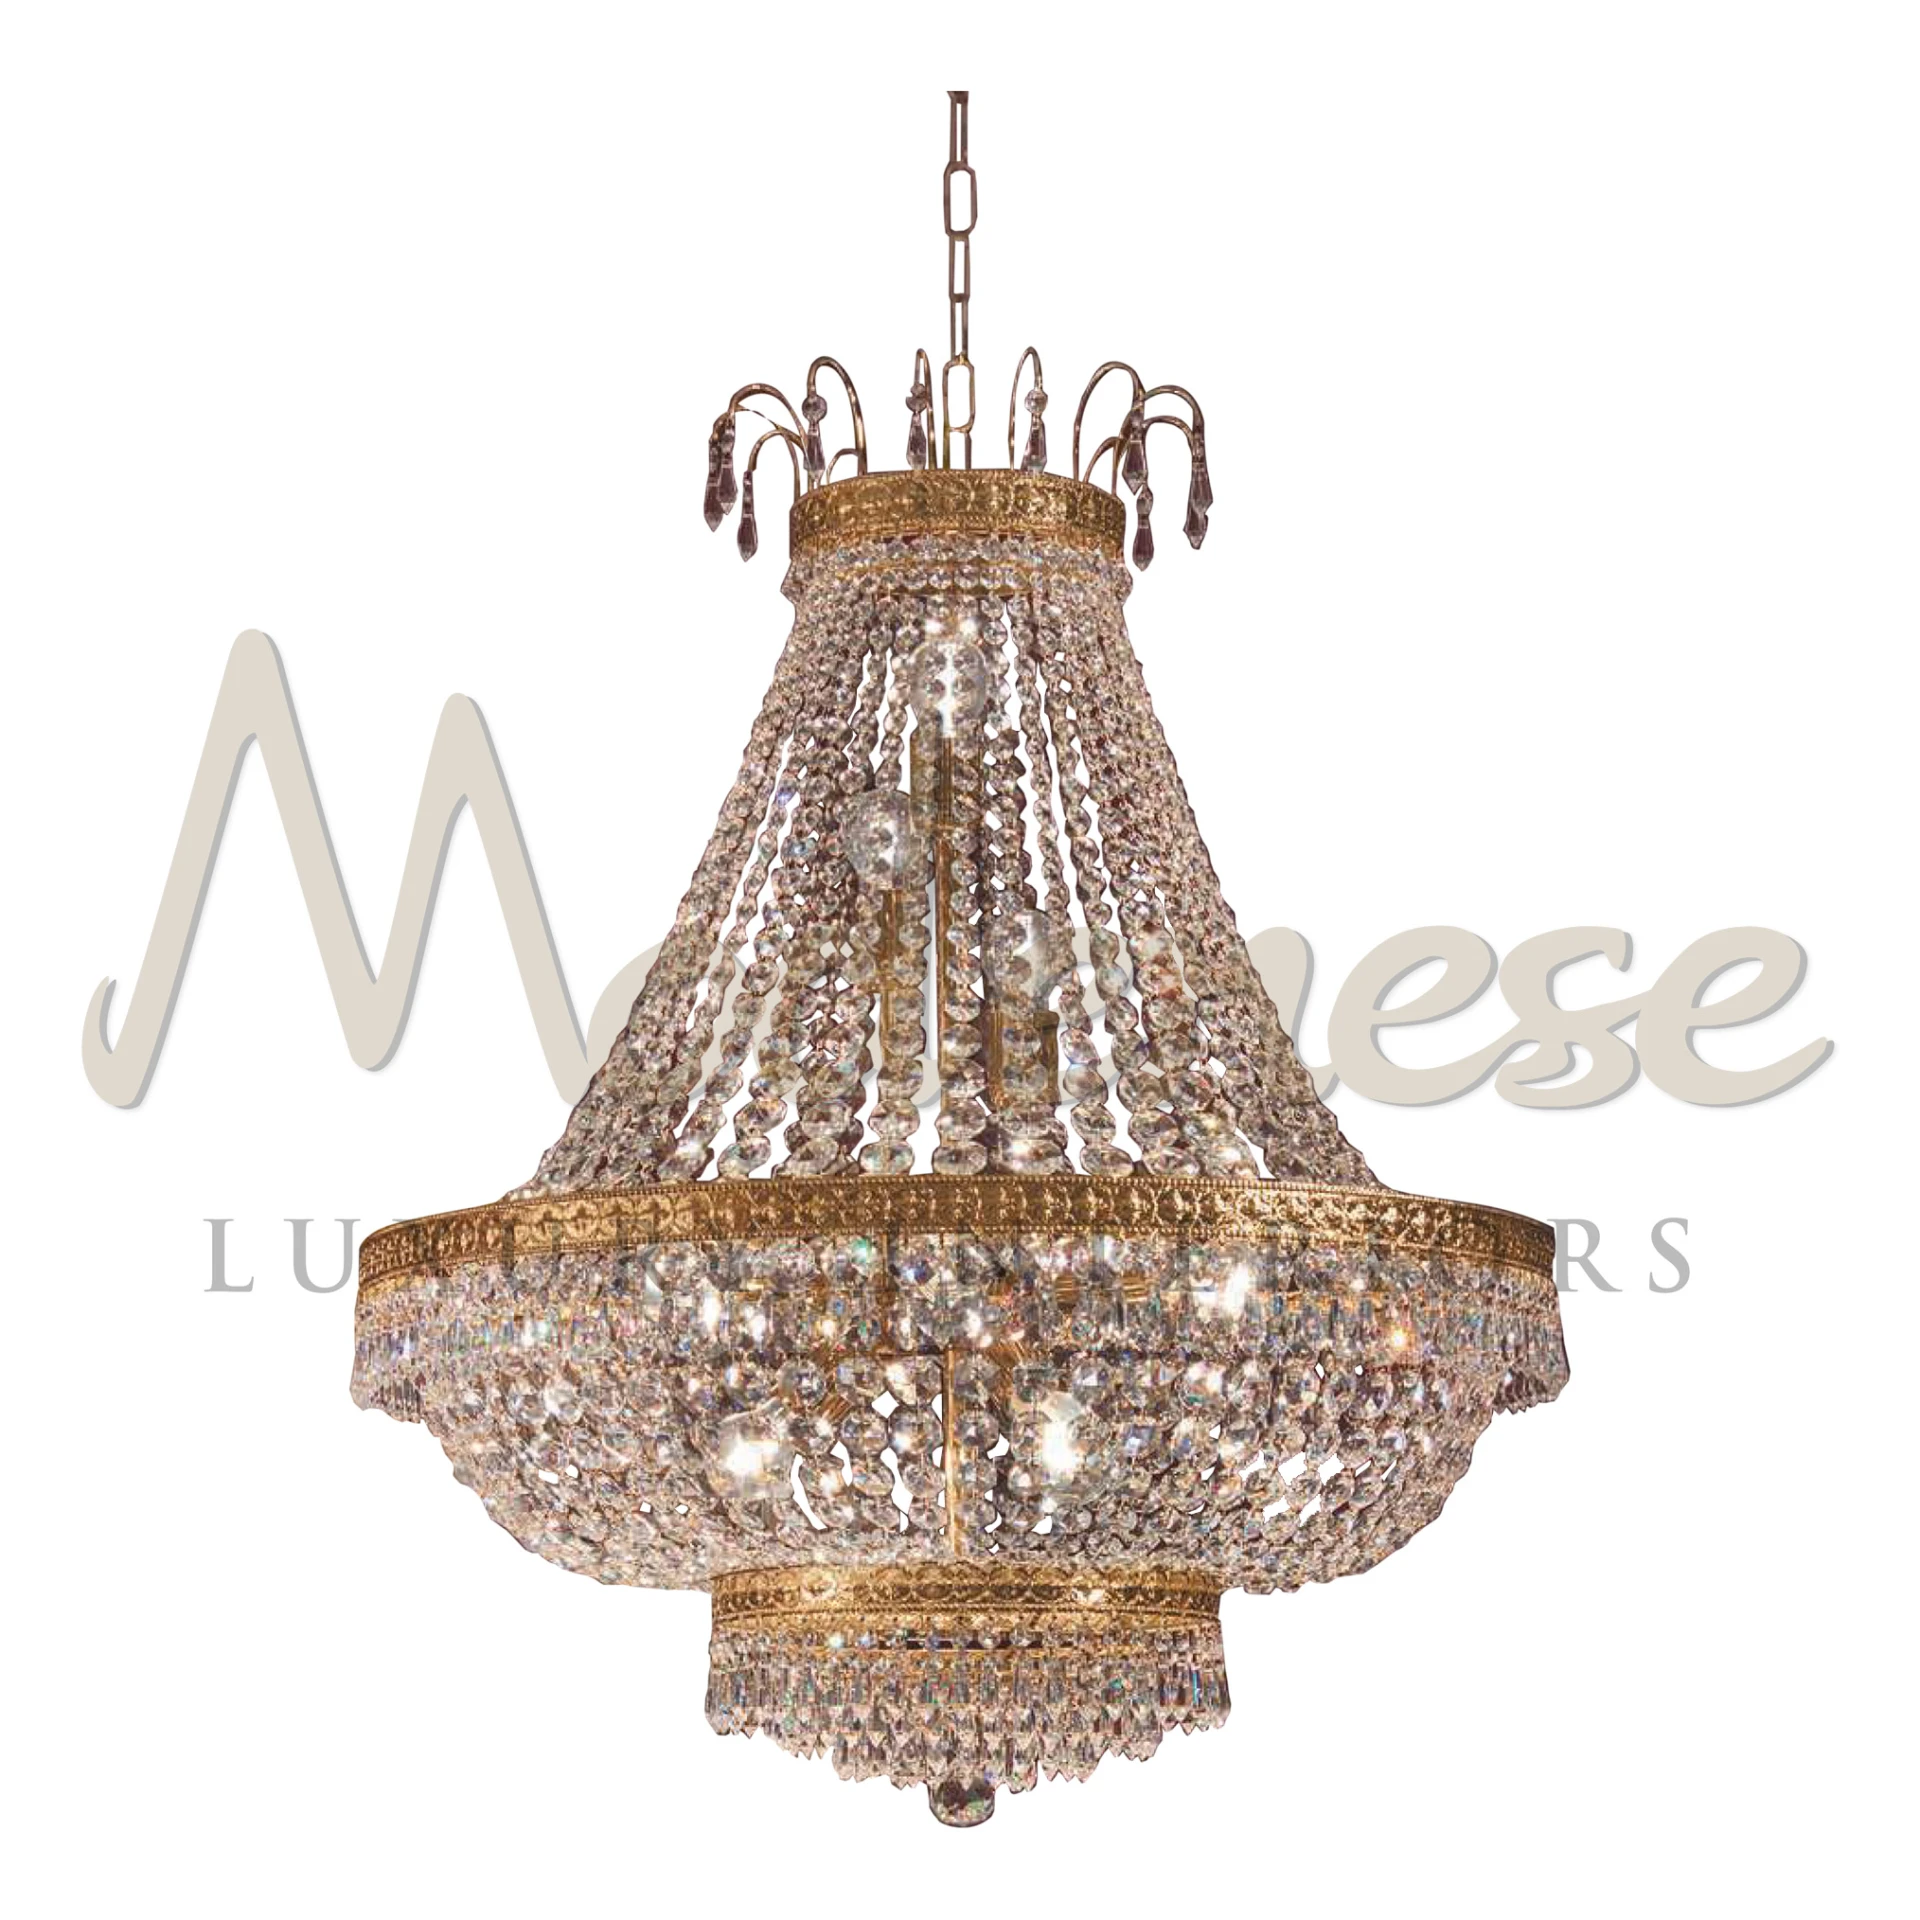 Luxurious 'Versailles Vista Chandelier' with intricate crystal strands and a grand structure